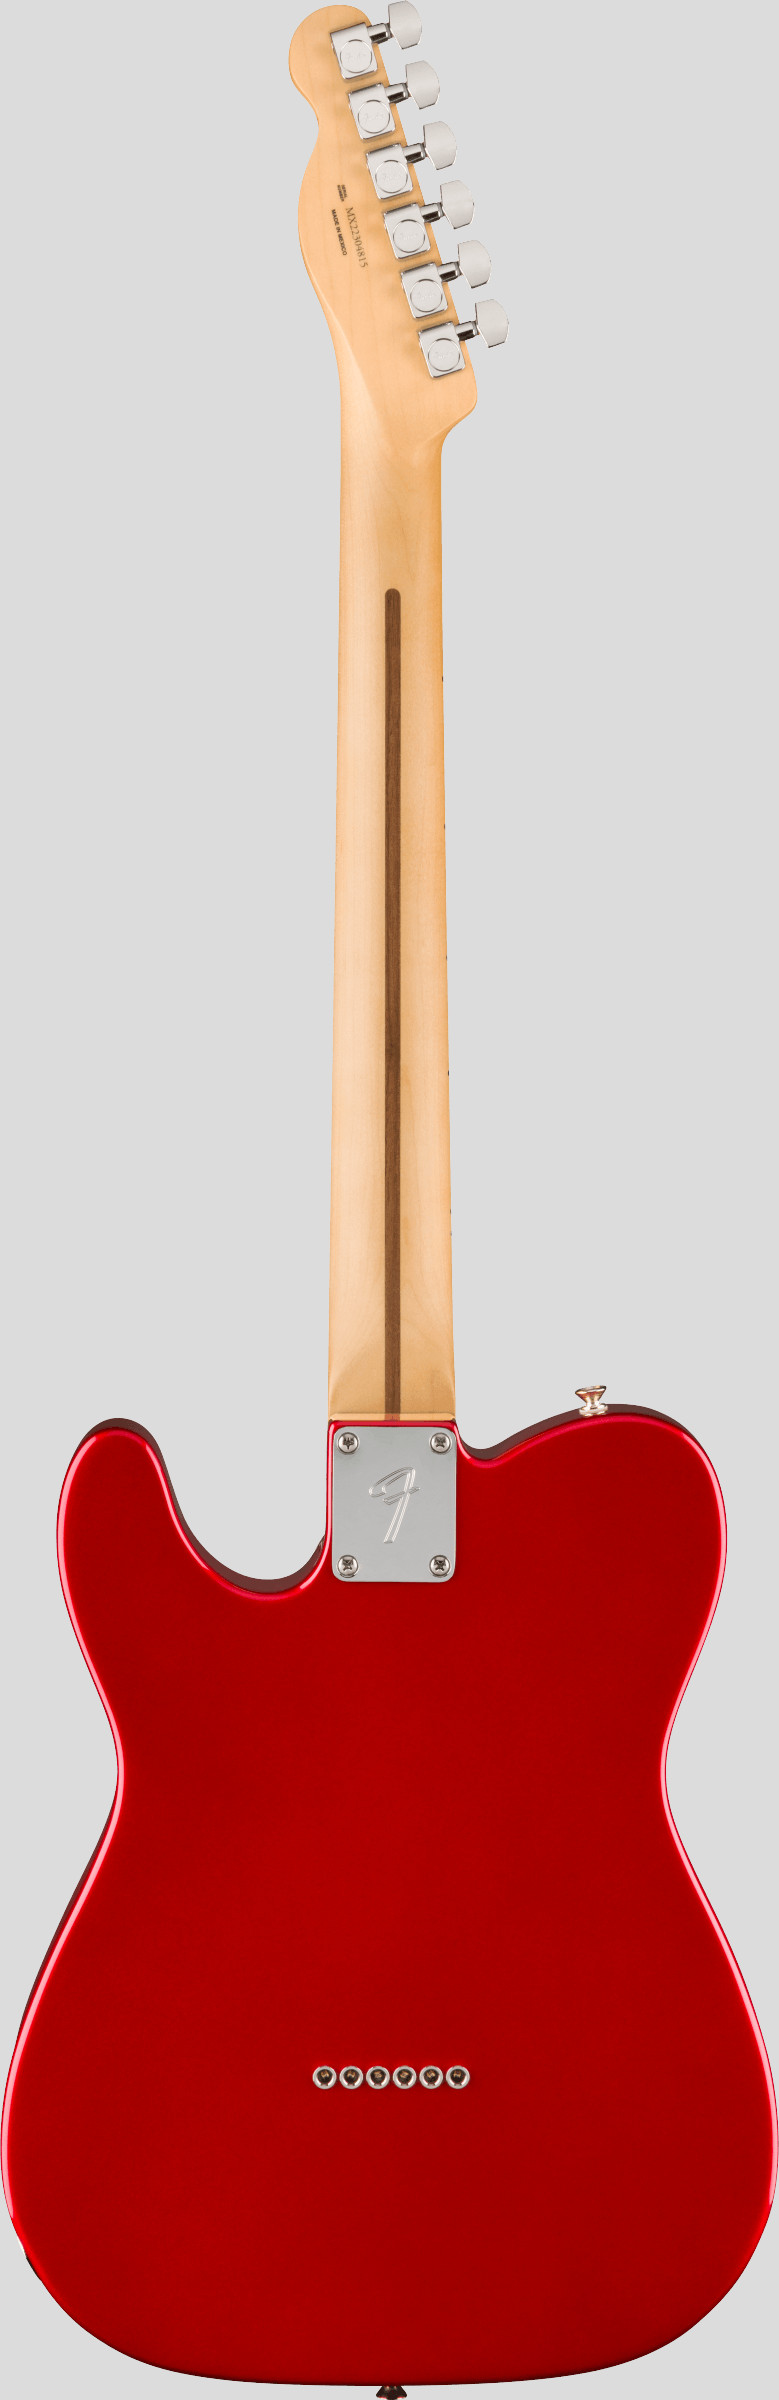 Fender Player Telecaster Candy Apple Red 2